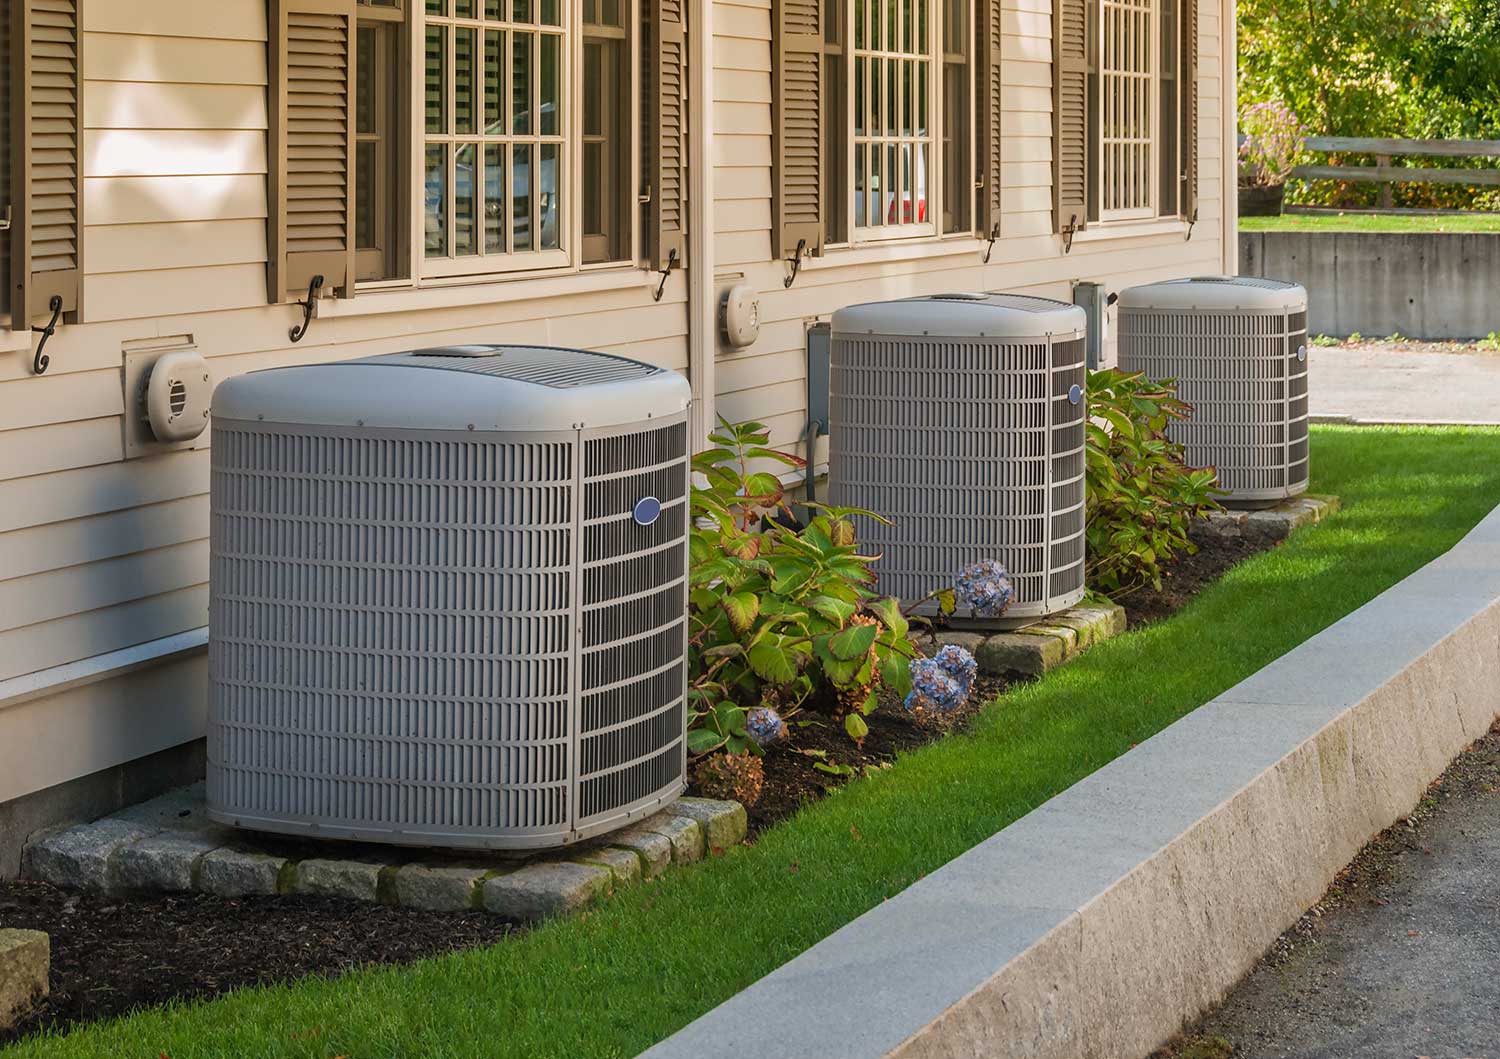 Base housing plus Heating plus Air Conditioning systems.